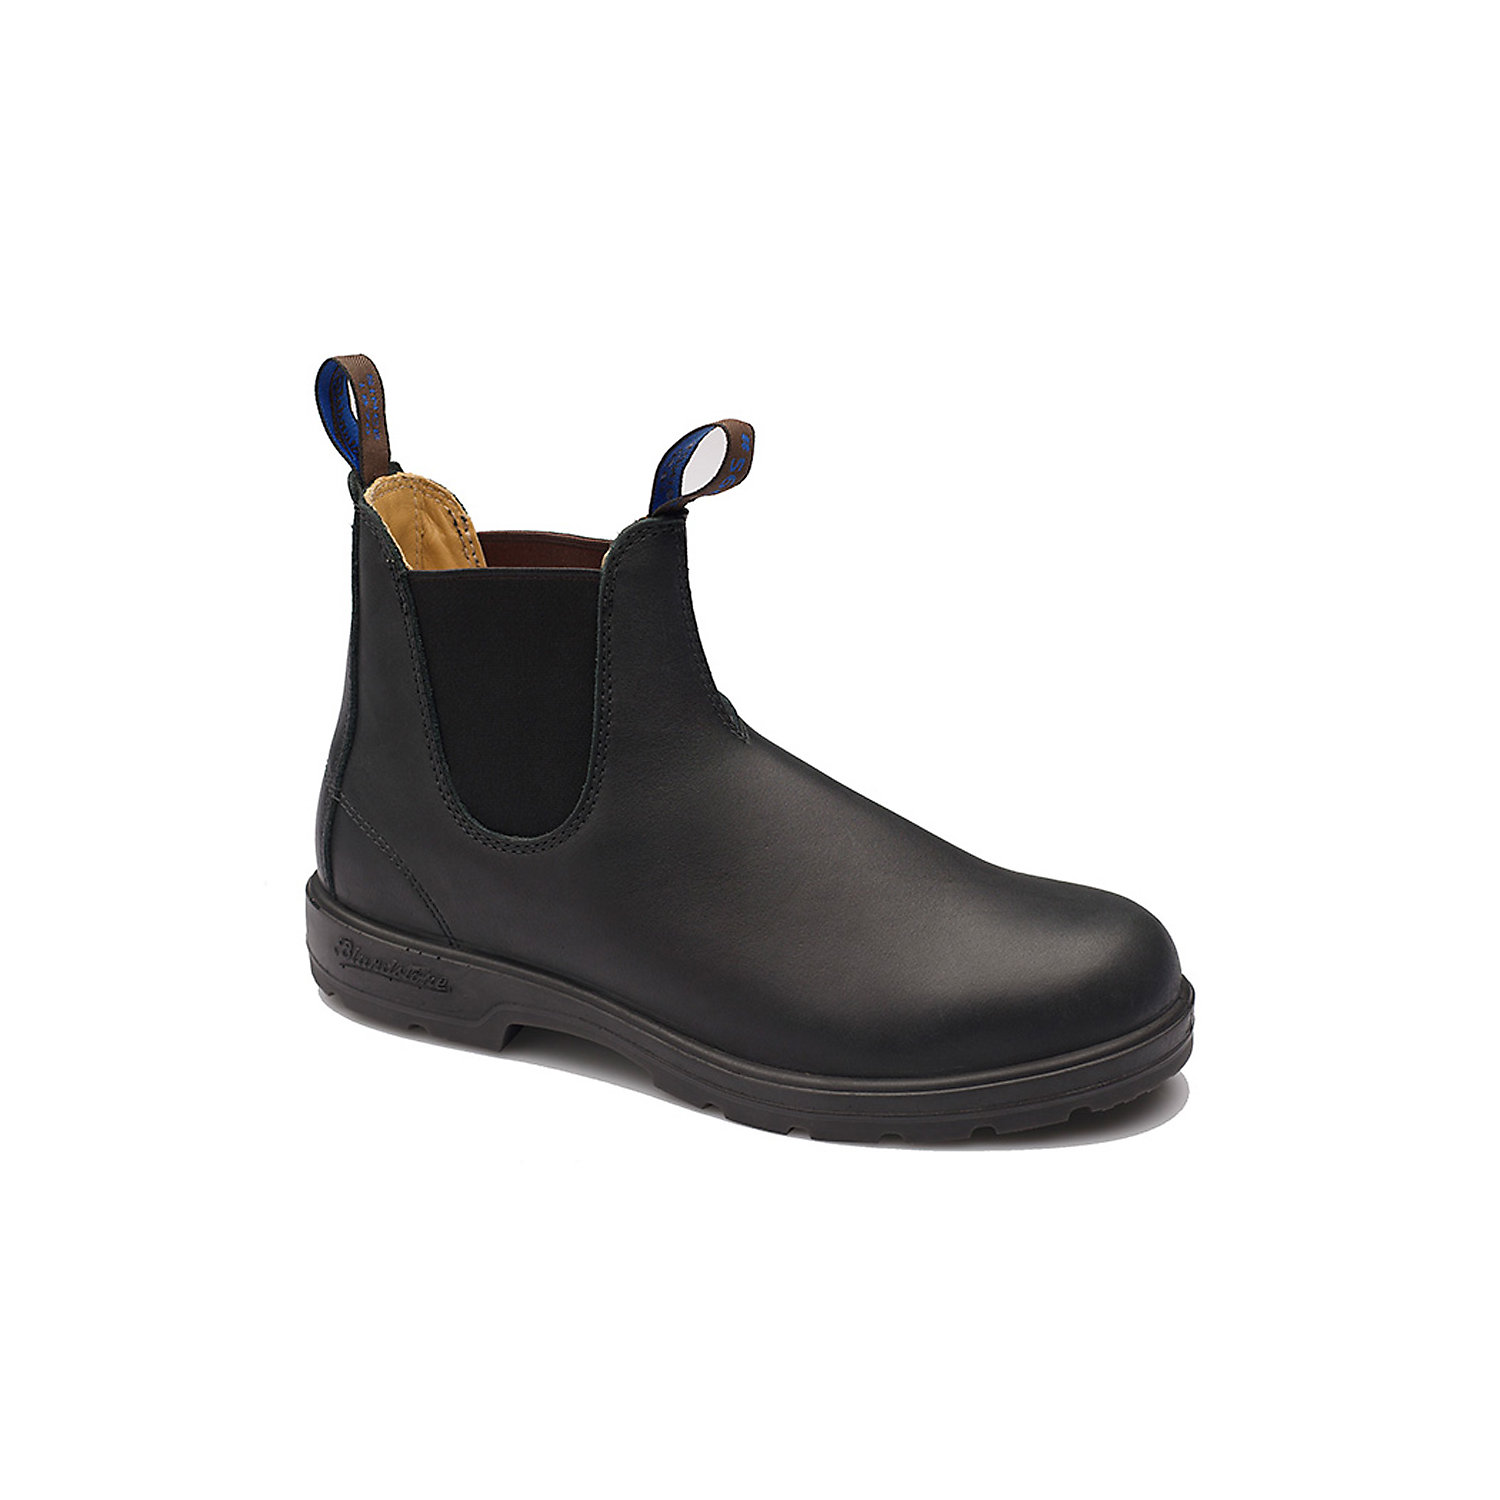 Blundstone 566 Thermal Boot